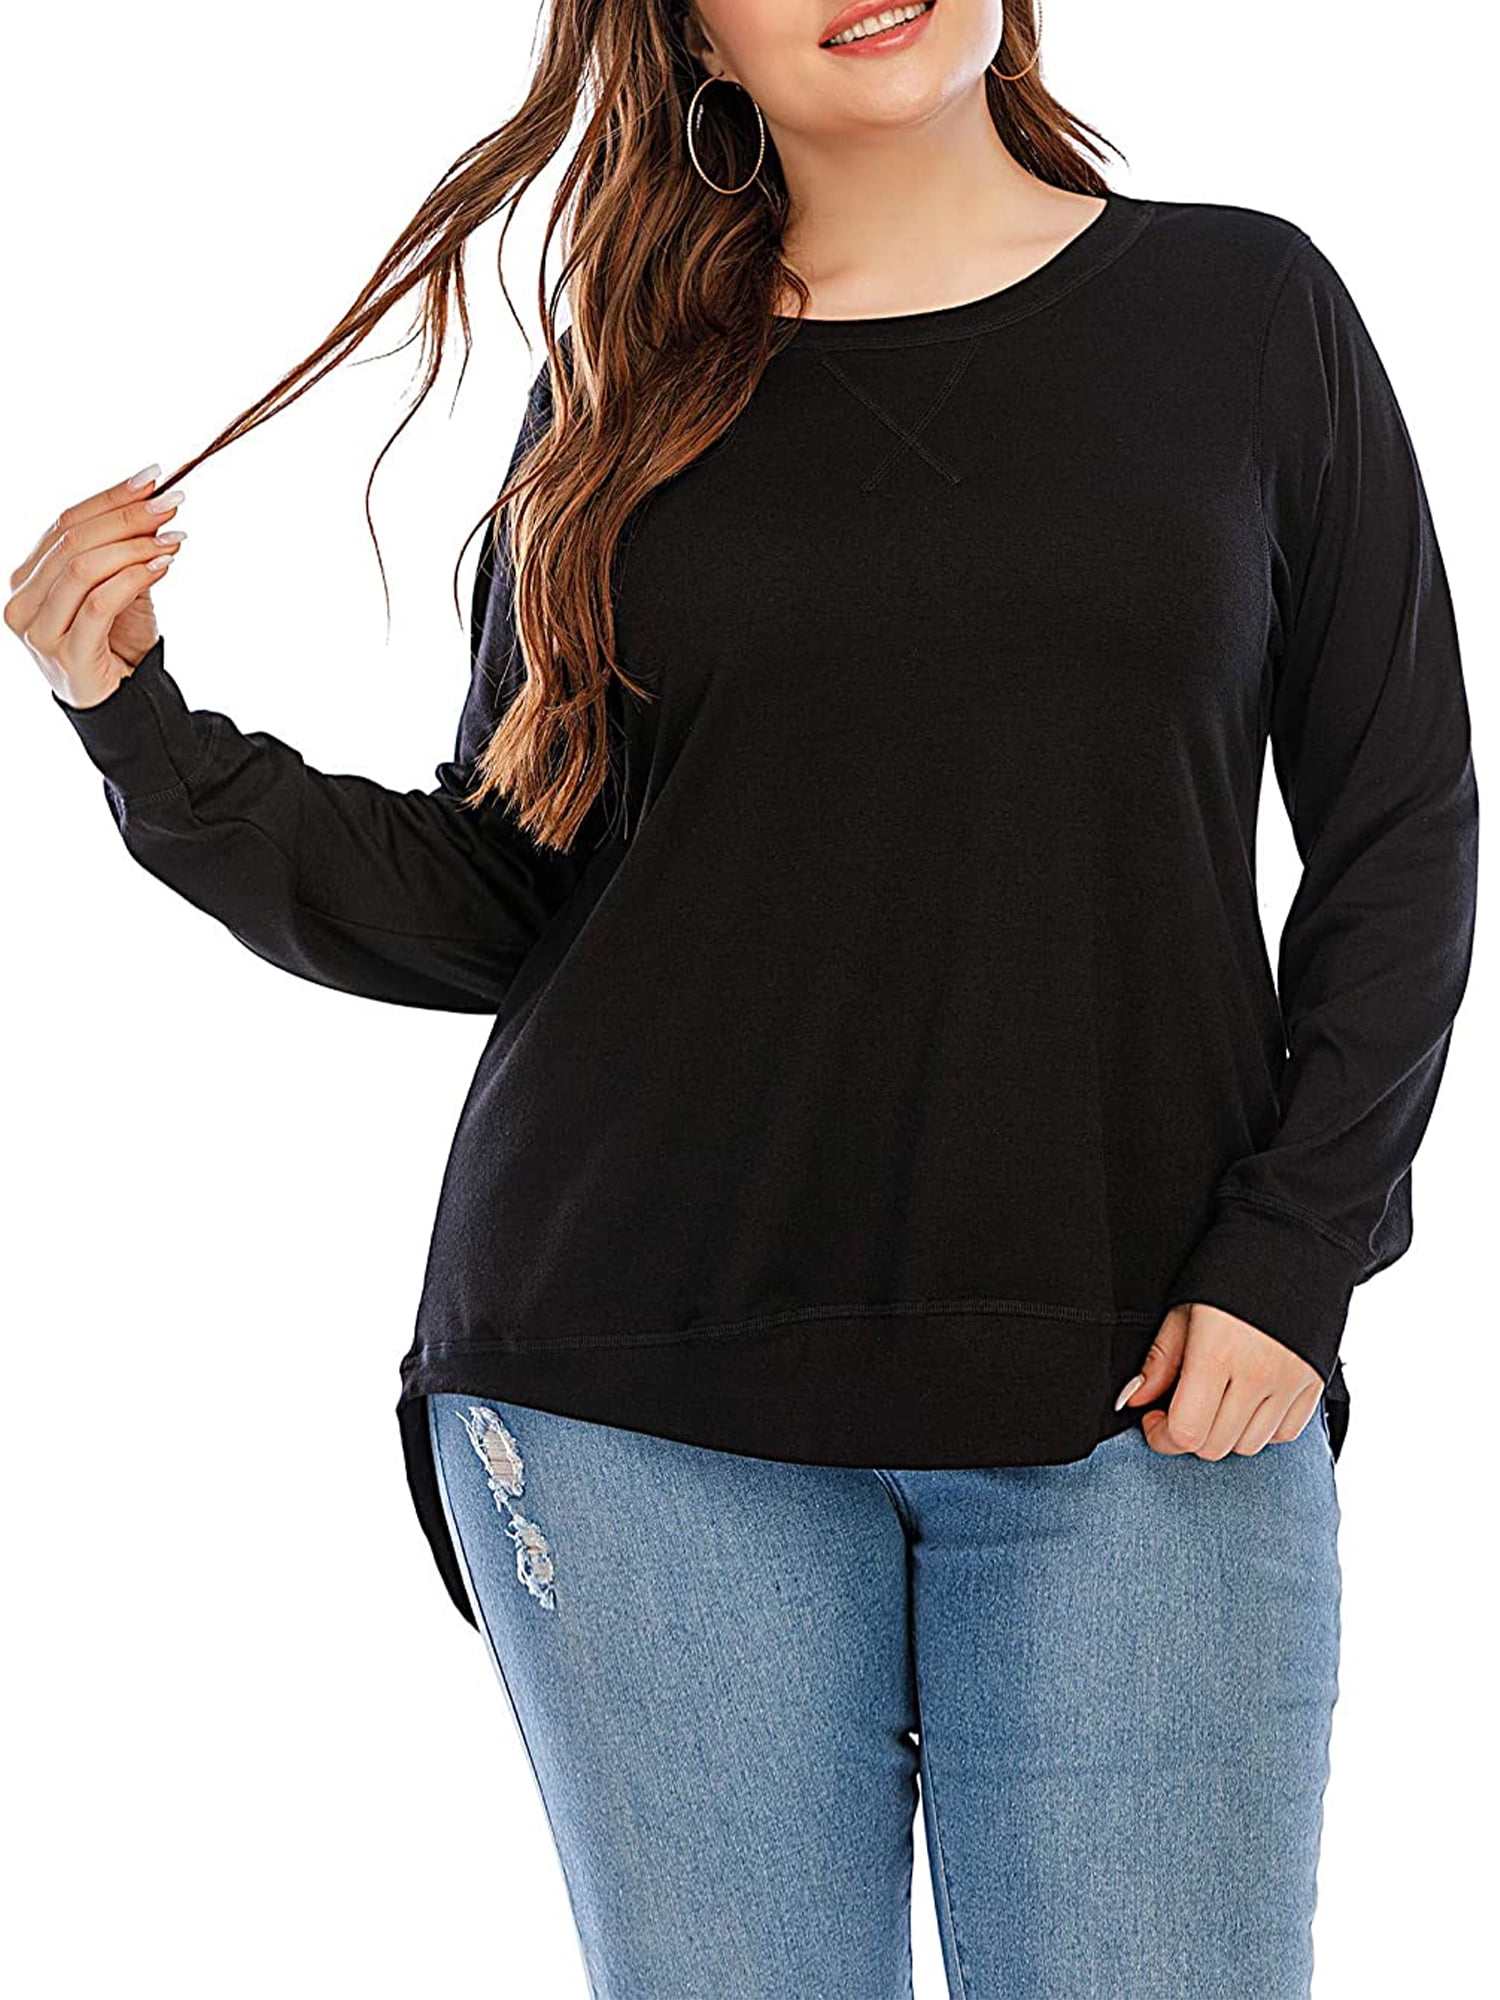 Thanksgiving Gift,Women Long Sleeve Button Trim T-Shirt Tops,Plus Size Solid Round Neck Tunic Blouse Tee 